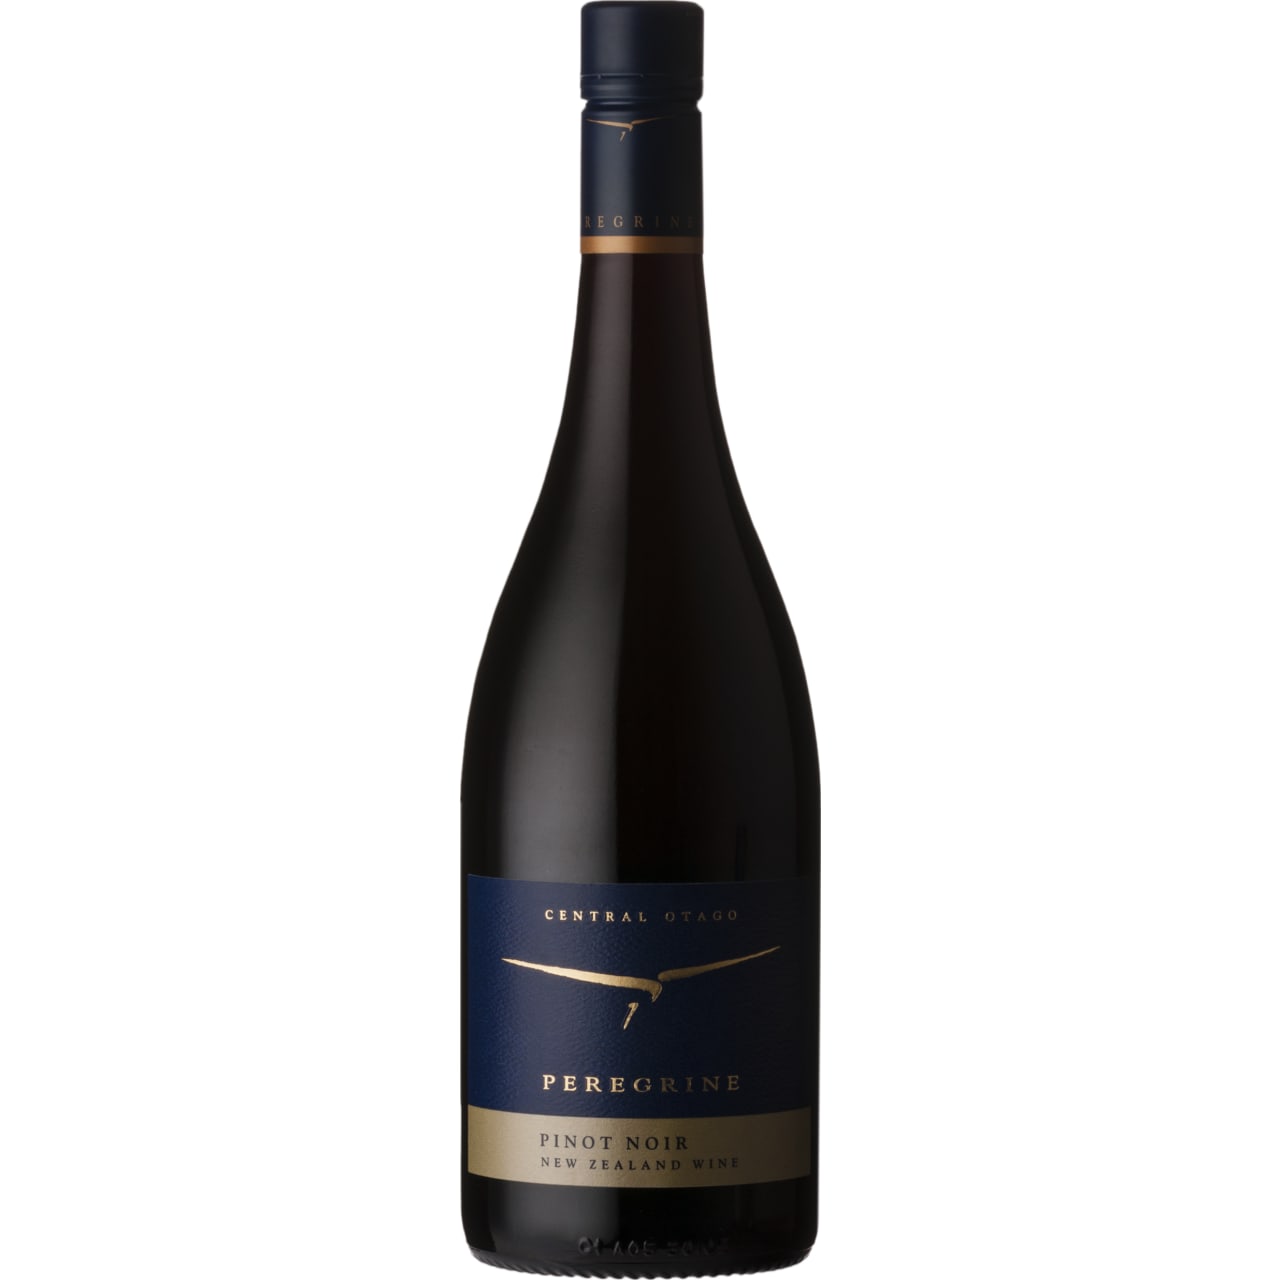 Dark cherry, redcurrant and blackberry flavours finely layered with savoury and spice notes. A supple and silken textured, elegant Pinot Noir.